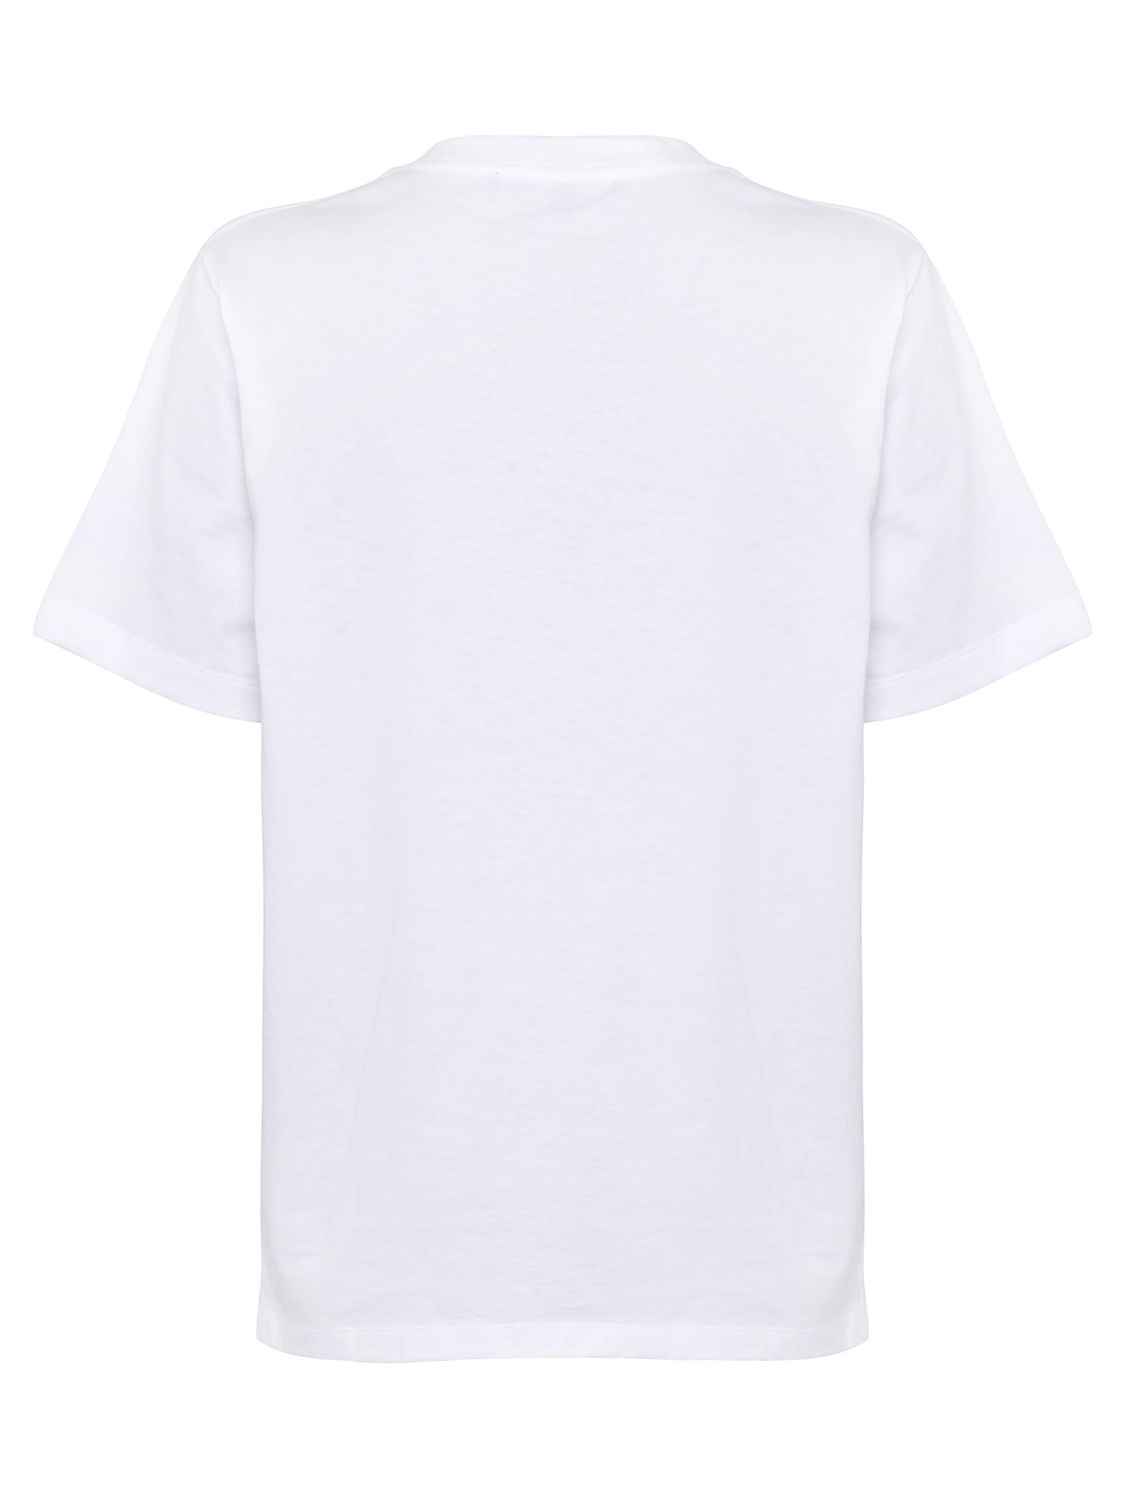 French Connection Jolie T-Shirt, White at John Lewis & Partners